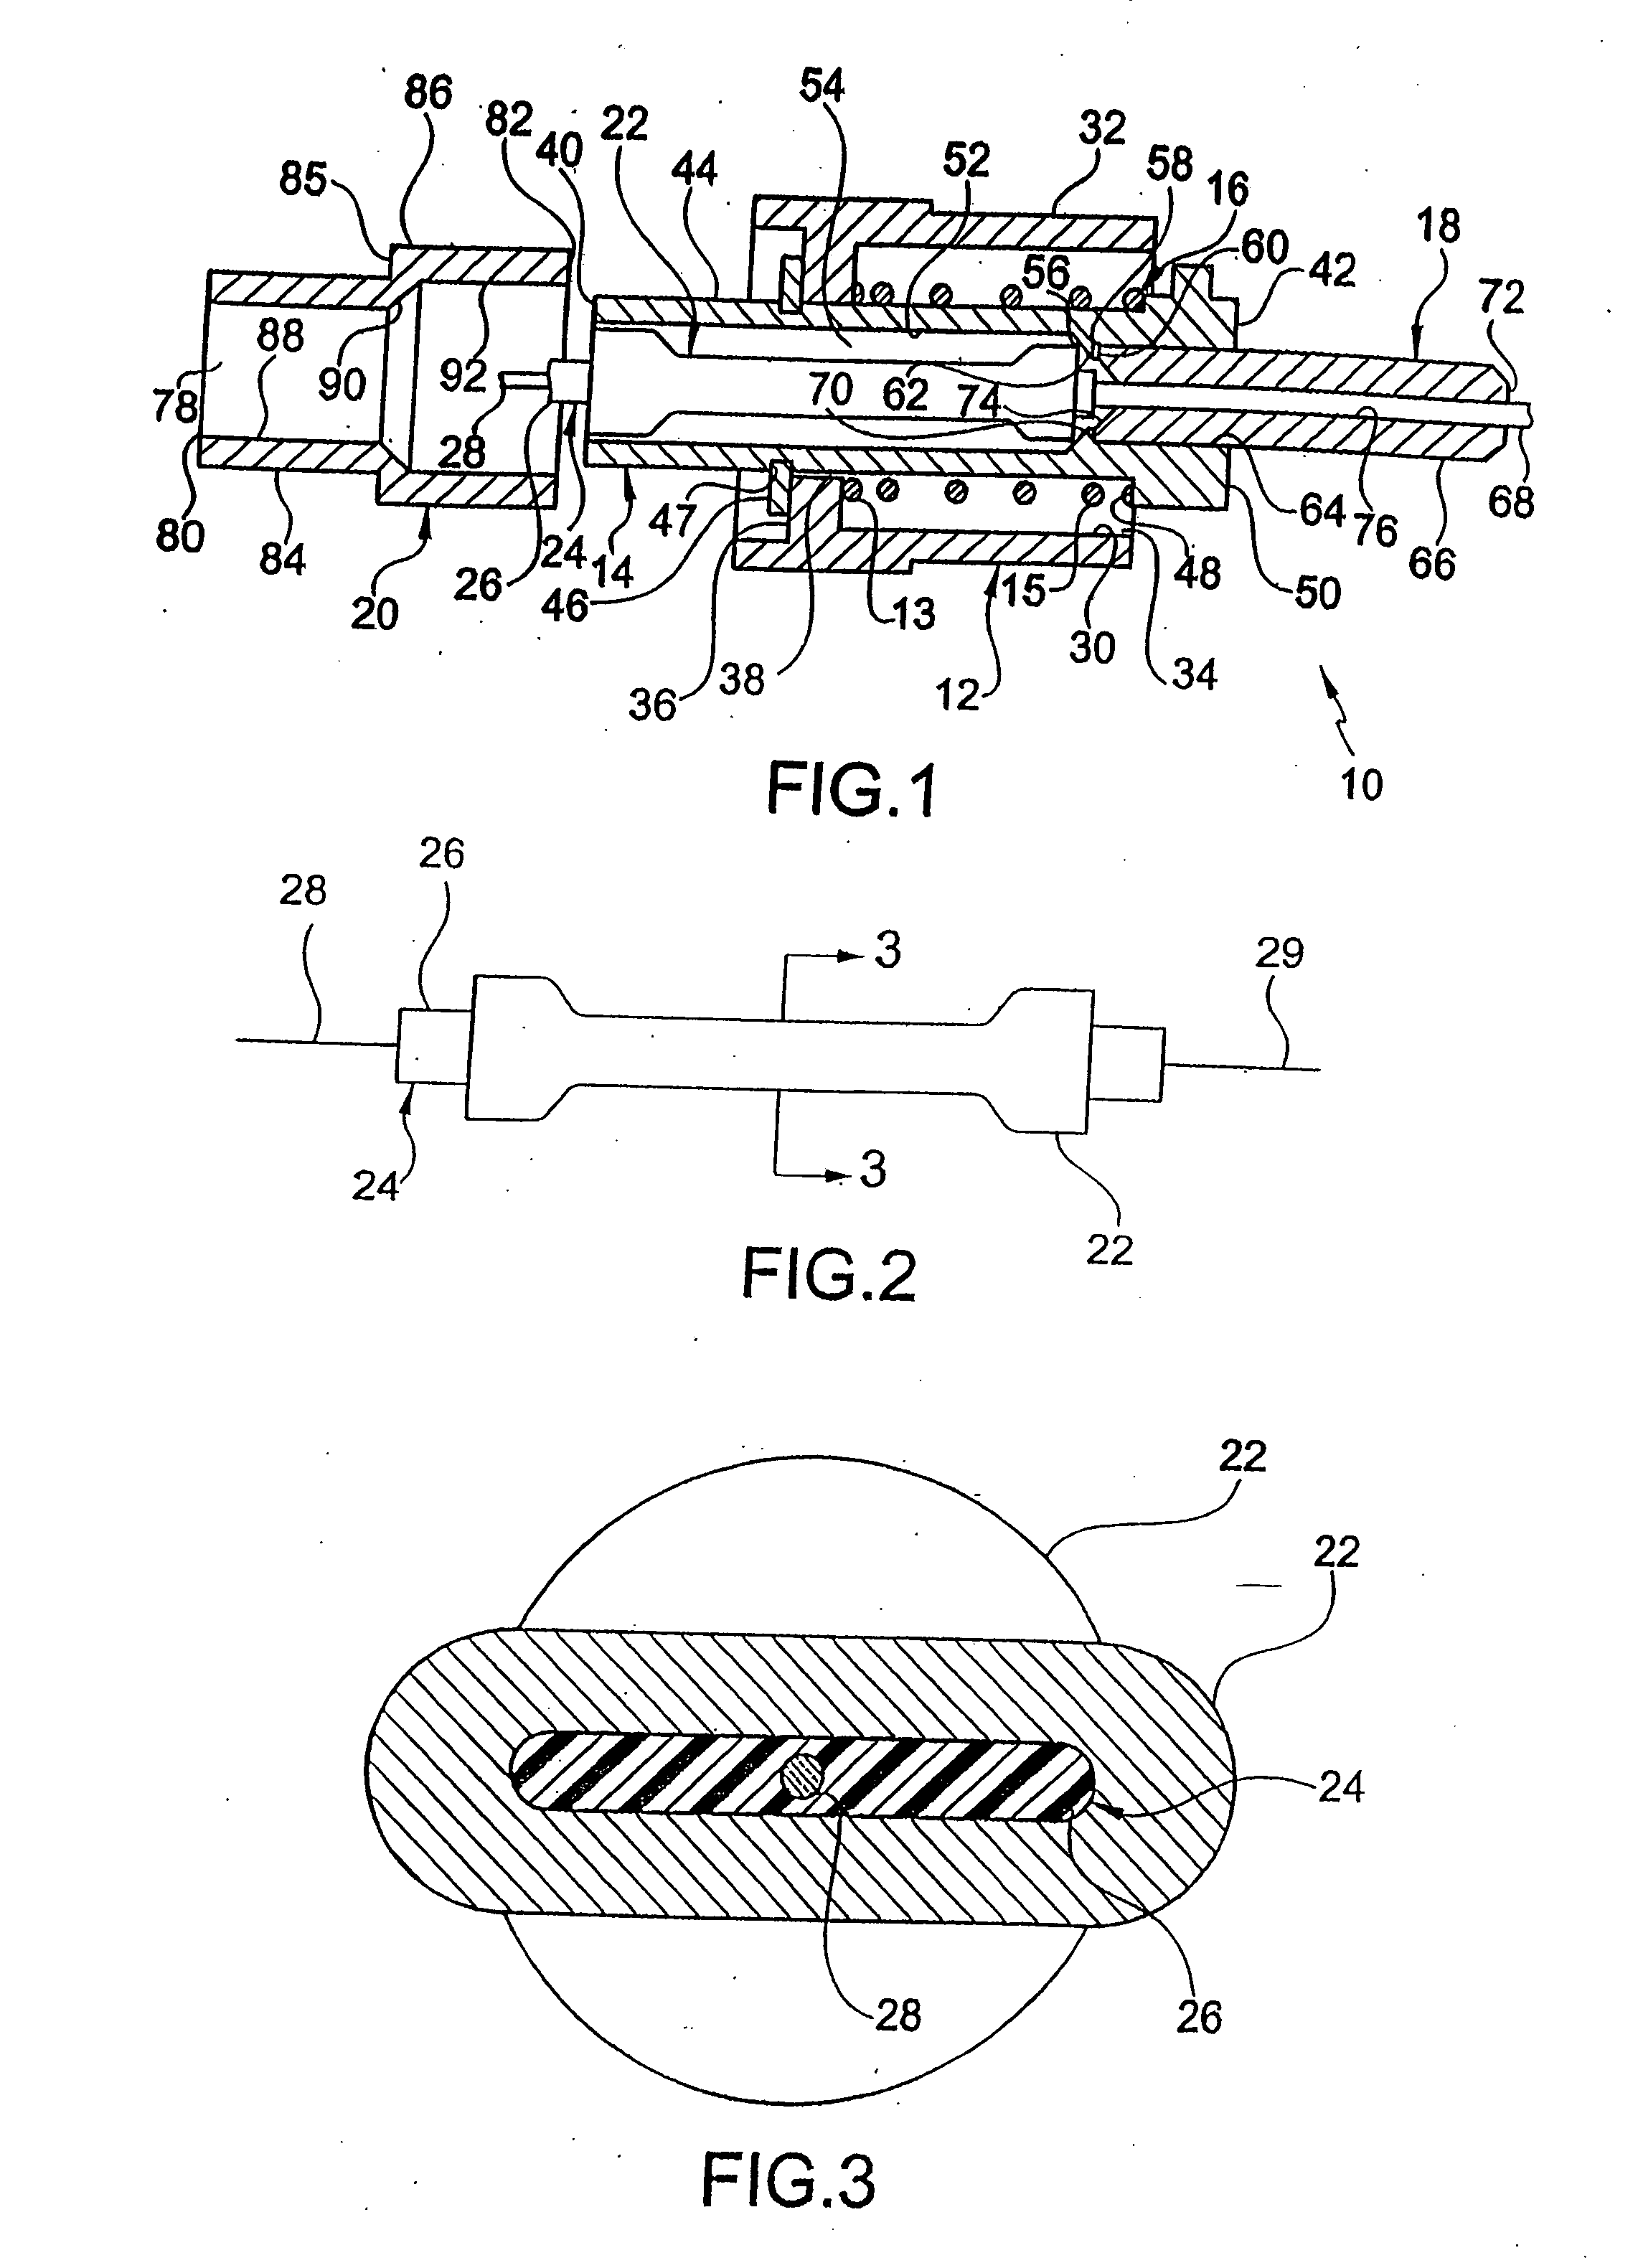 Crimp tool for strain relief connector and method of forming a strain relief connector